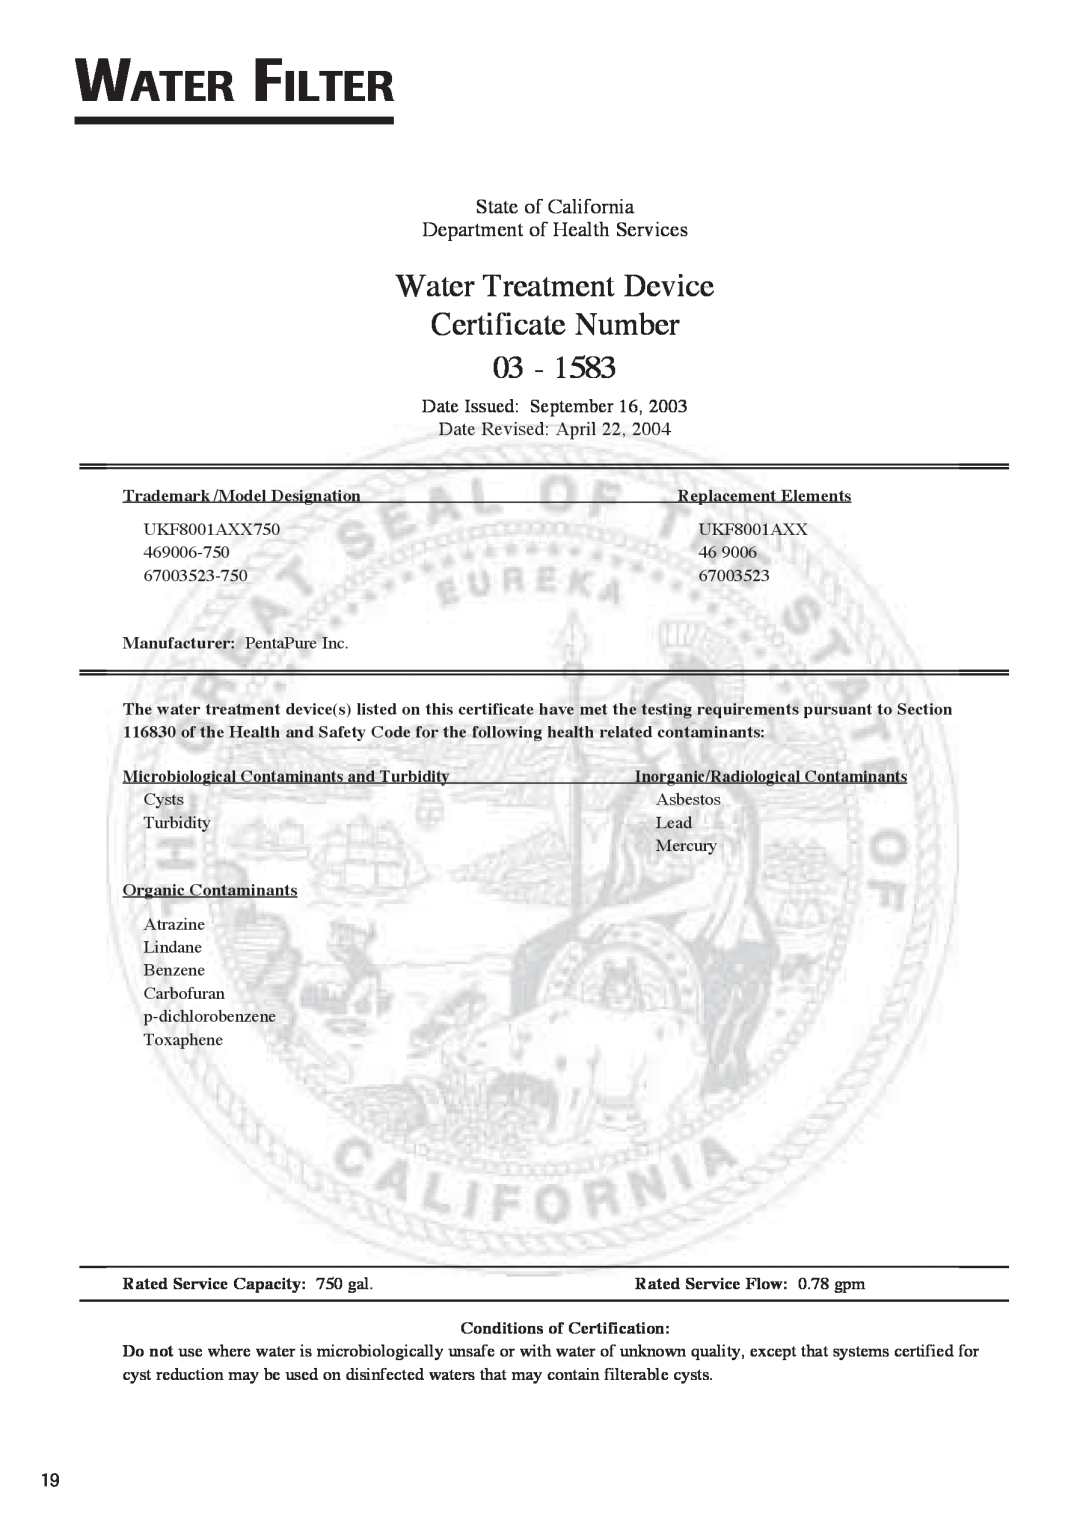 Fisher & Paykel RX256DT7X1 Water Treatment Device, Certificate Number, State of California Department of Health Services 